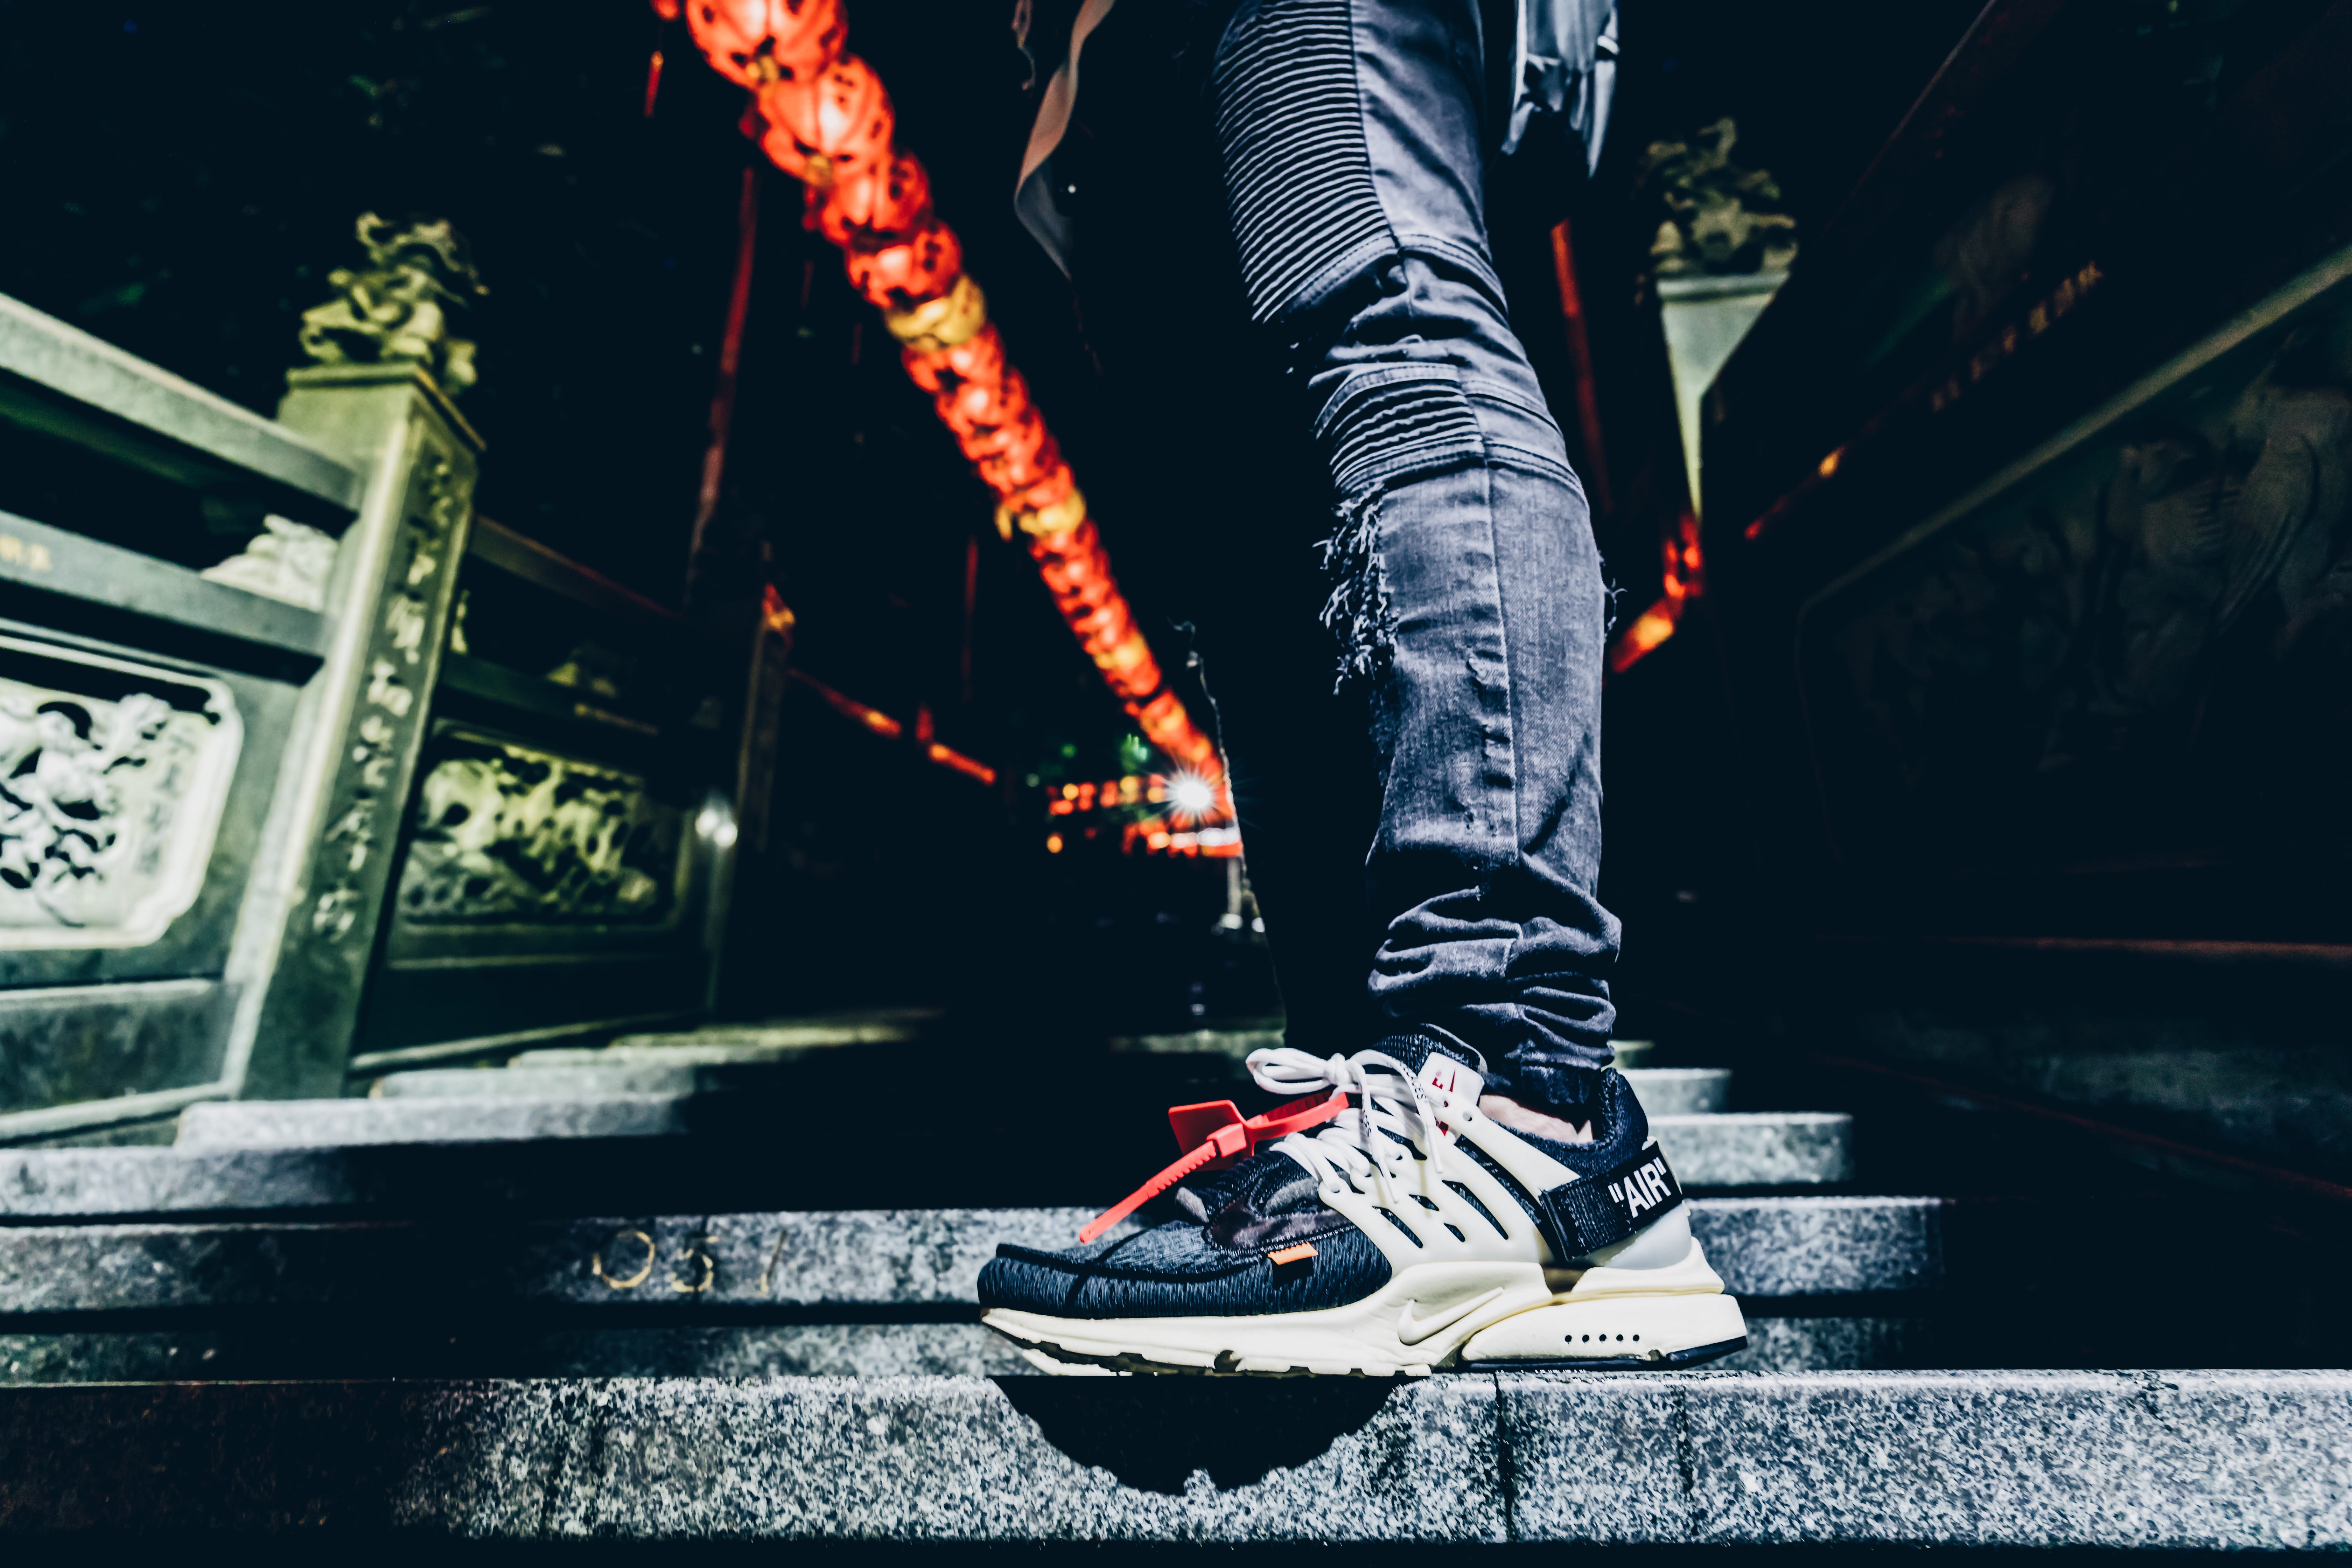 wallpapers miscellanea, miscellaneous, sneakers, stairs, ladder, jeans, leg, sneaker